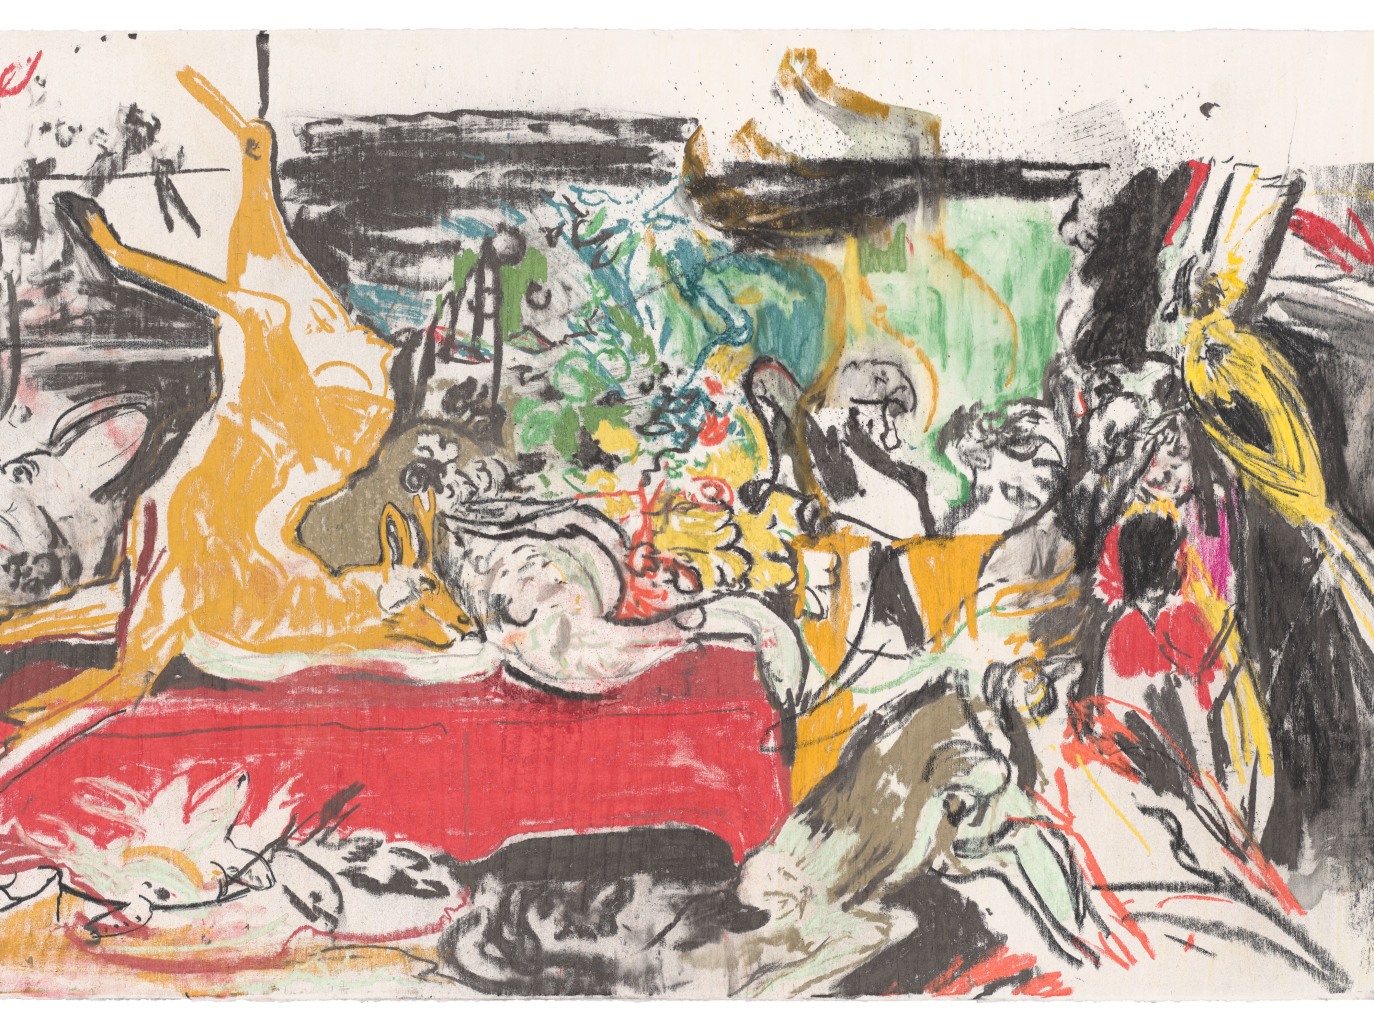 Cecily Brown: The Calls of the Hunting Horn